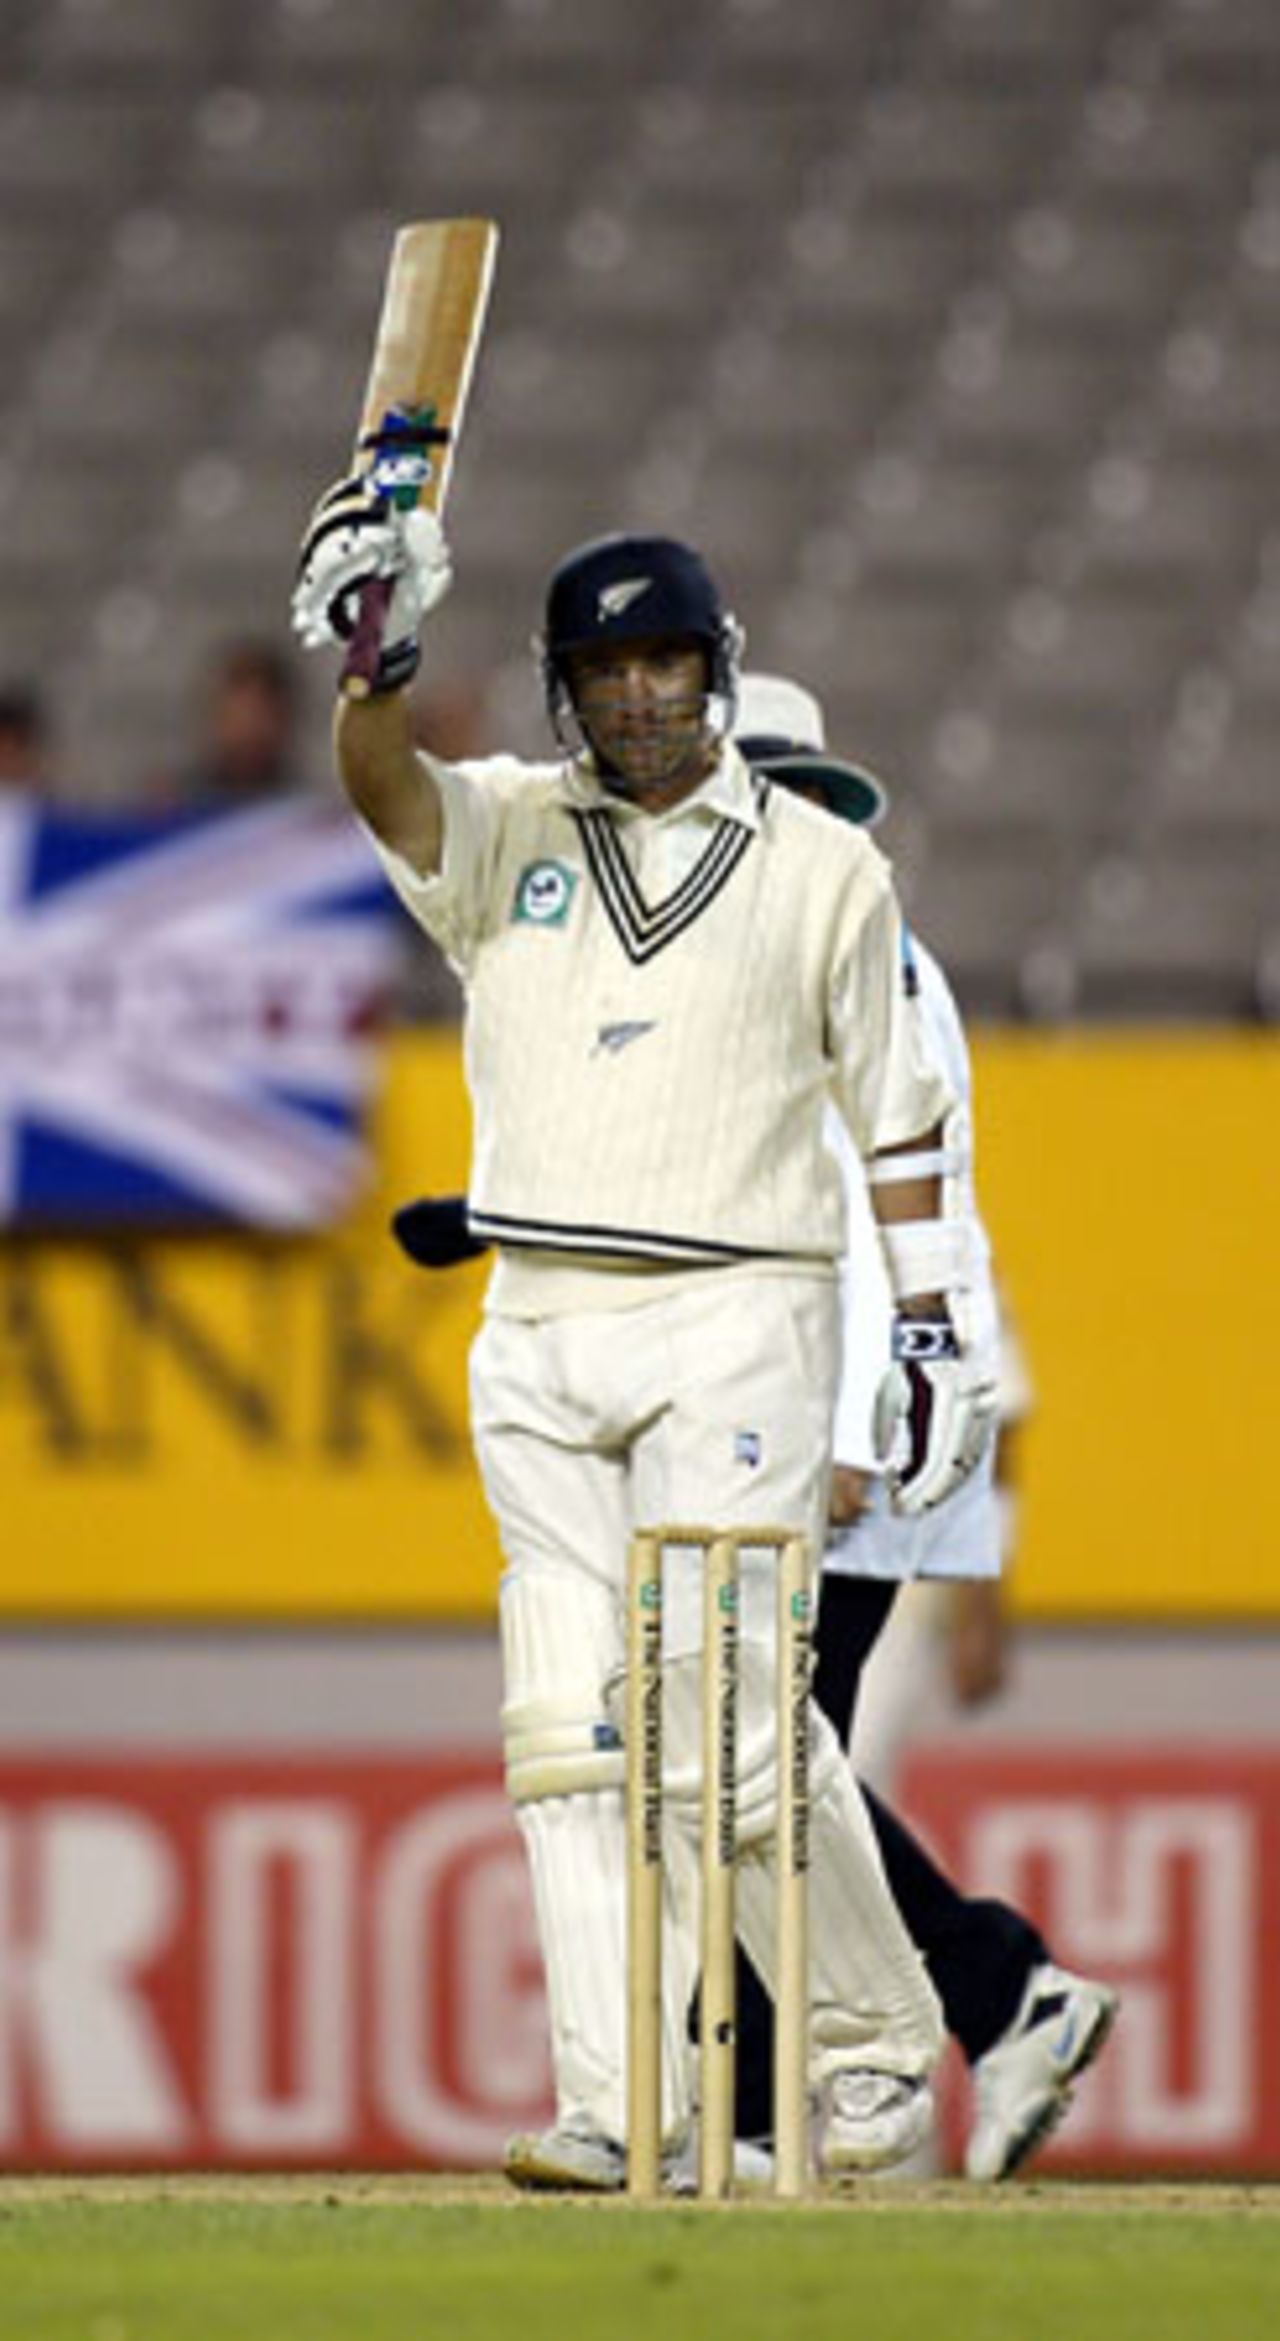 New Zealand batsman Craig McMillan raises his bat to celebrate reaching fifty in his second innings. McMillan ended the fourth day's play on 50 not out. 3rd Test: New Zealand v England at Eden Park, Auckland, 30 March-3 April 2002 (2 April 2002).